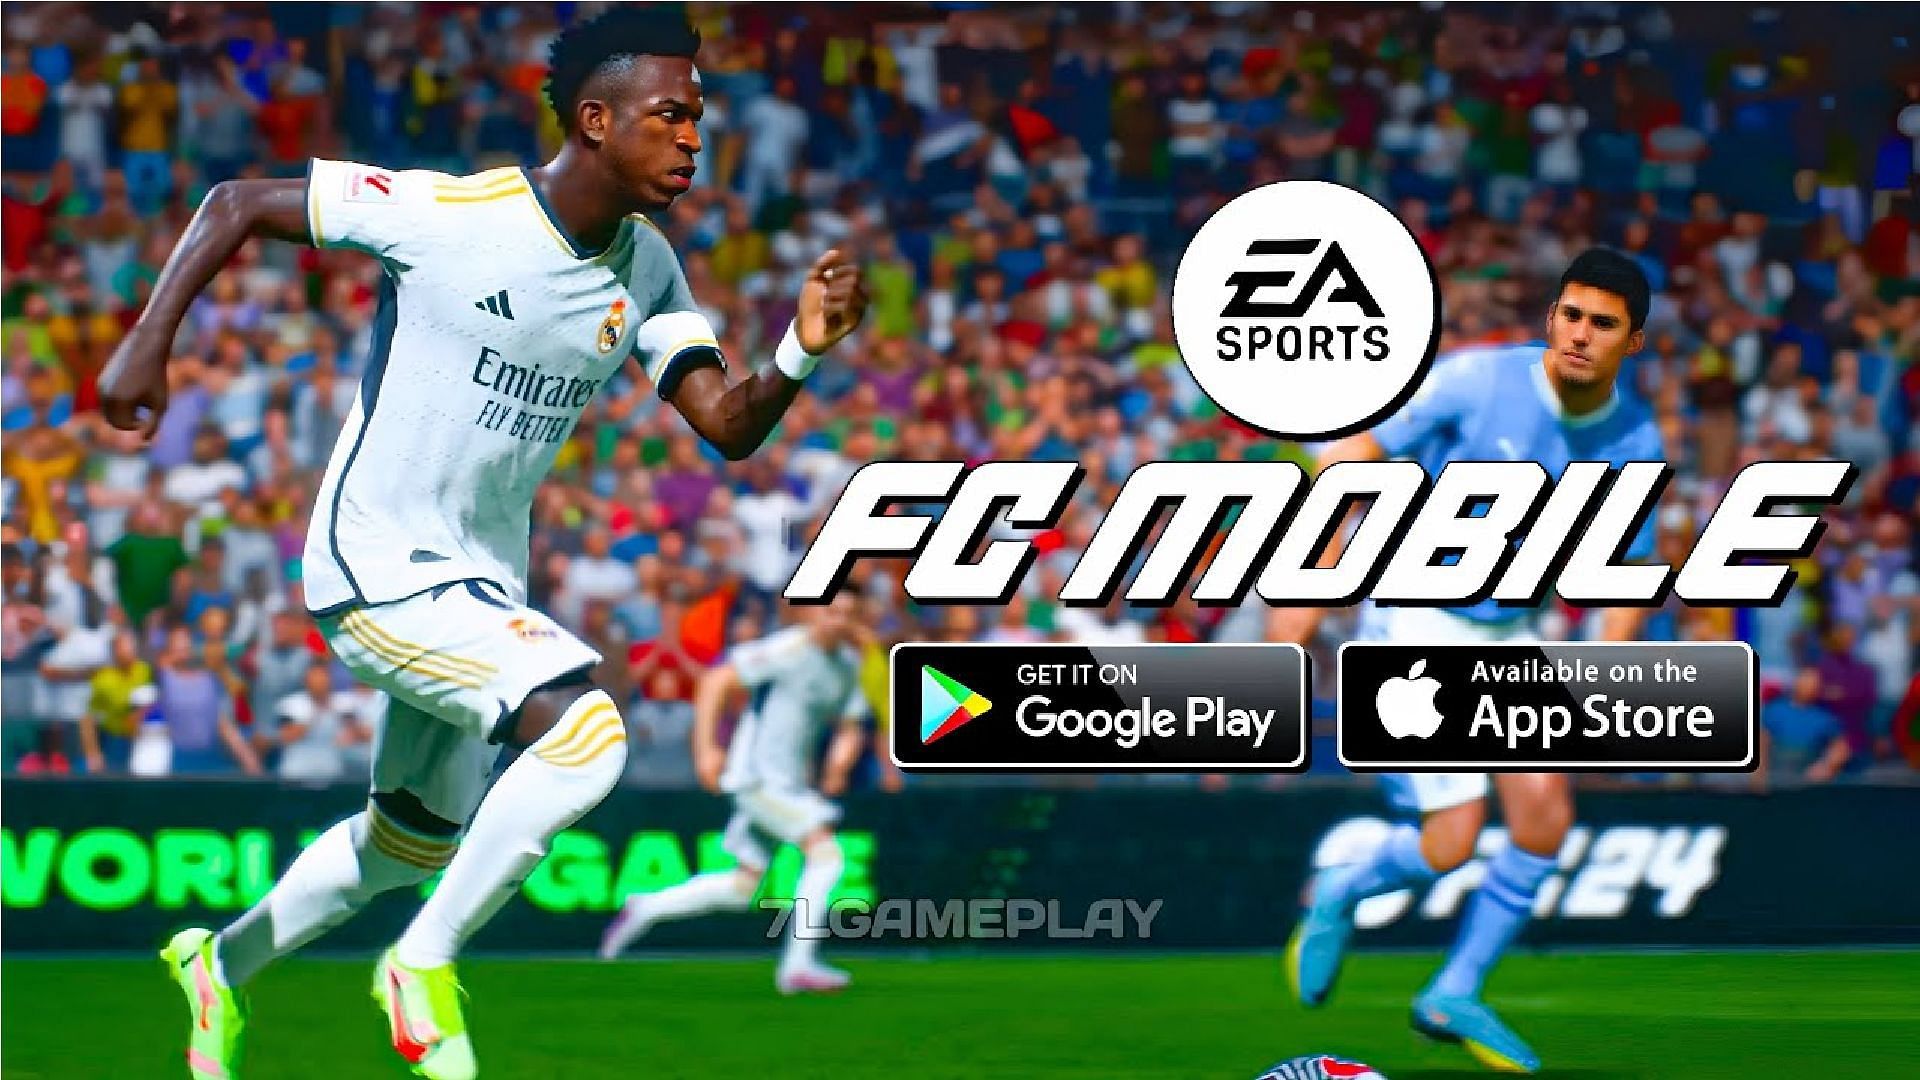 EA FC MOBILE New Penalty shootout, How to Score ?